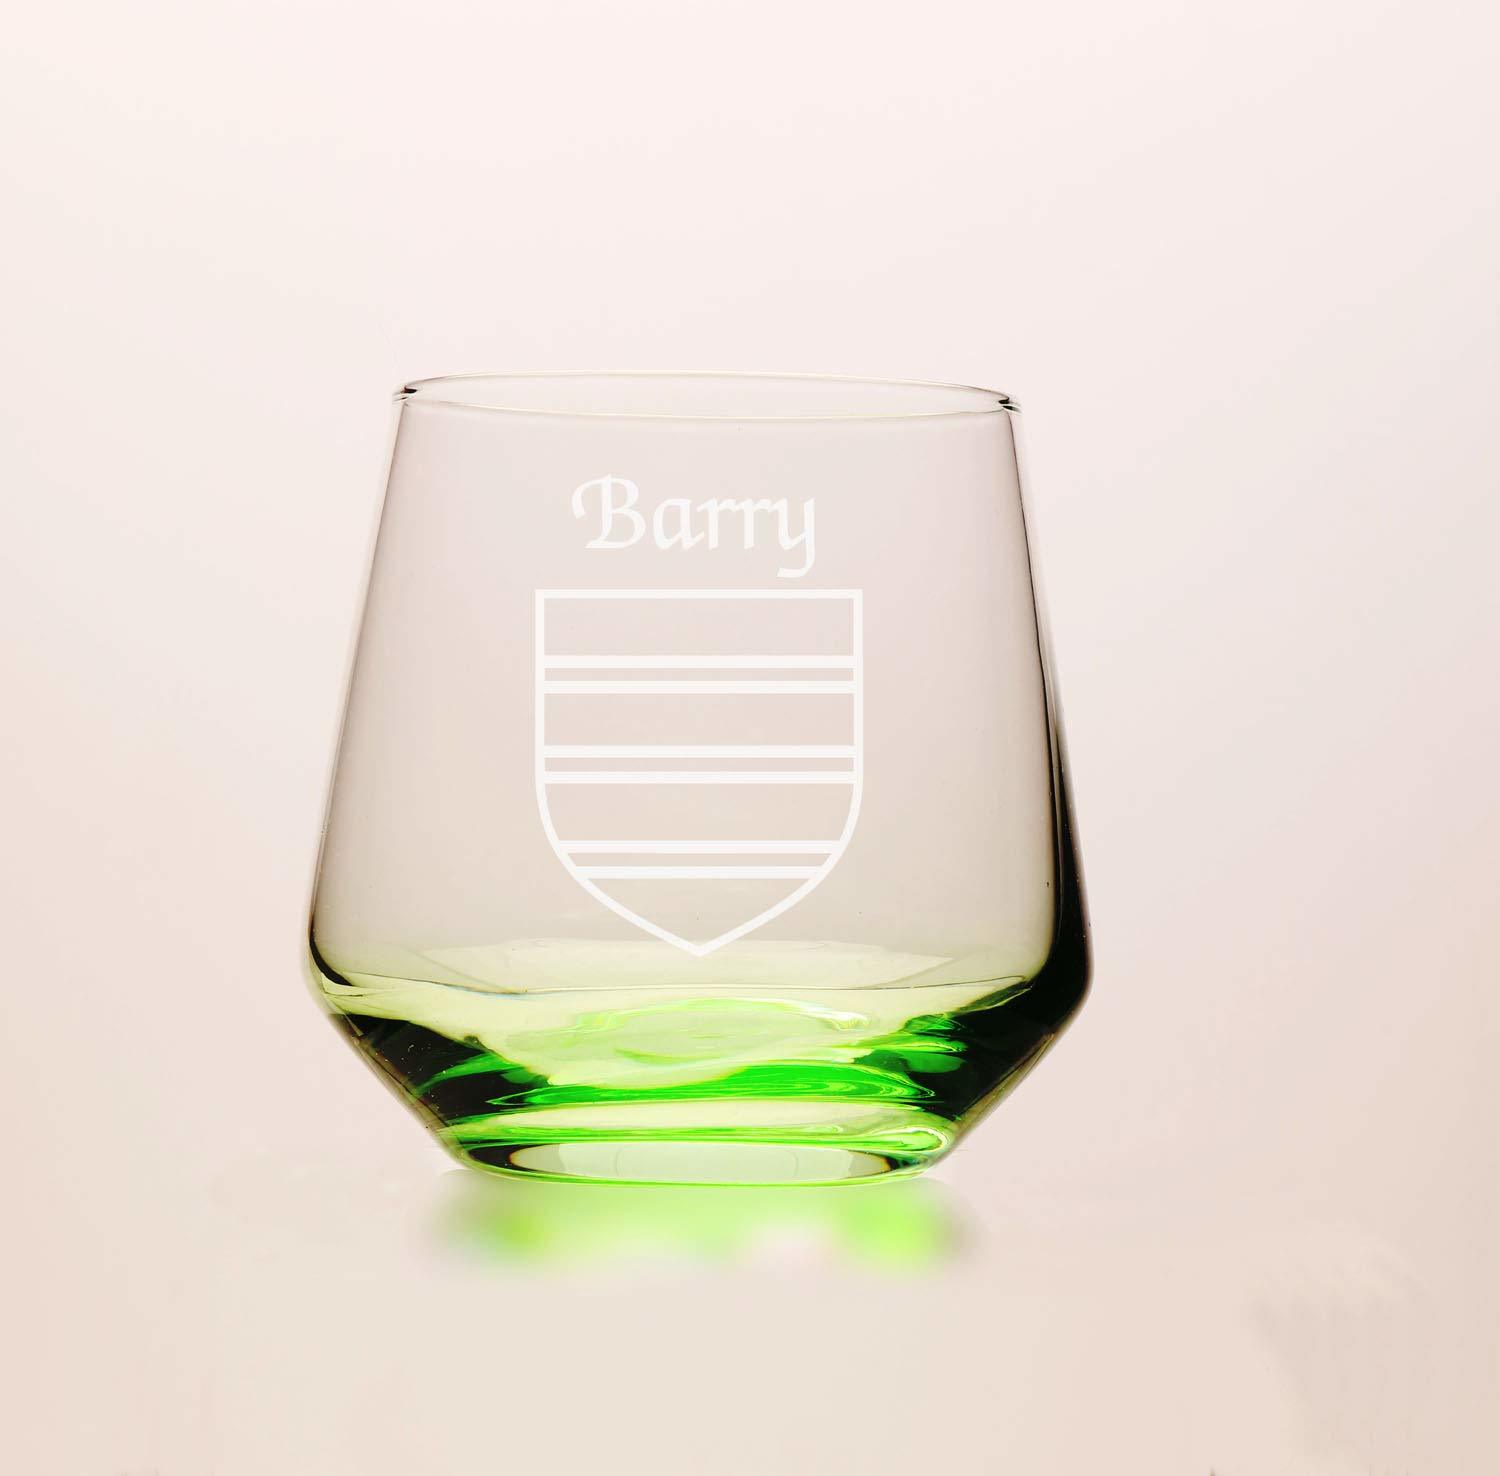 Primary image for Barry Irish Coat of Arms Green Tumbler Glasses - Set of 4 (Sand Etched)